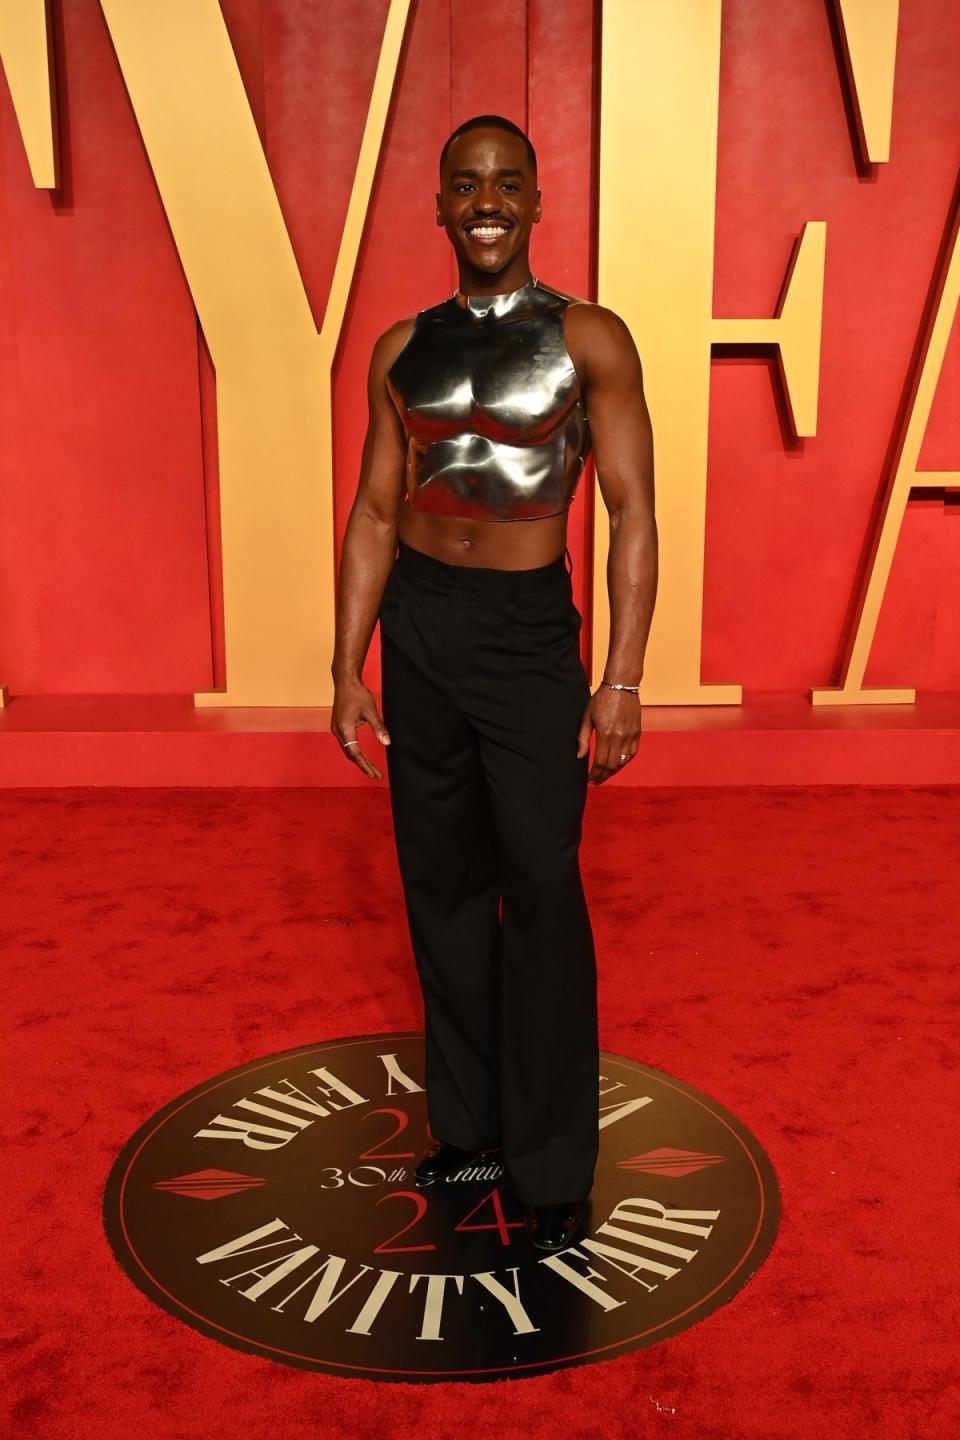 Gatwa shaowcased his Doctor Who-ready body at the Vanity Fair Oscars after party (Getty Images for Vanity Fair)